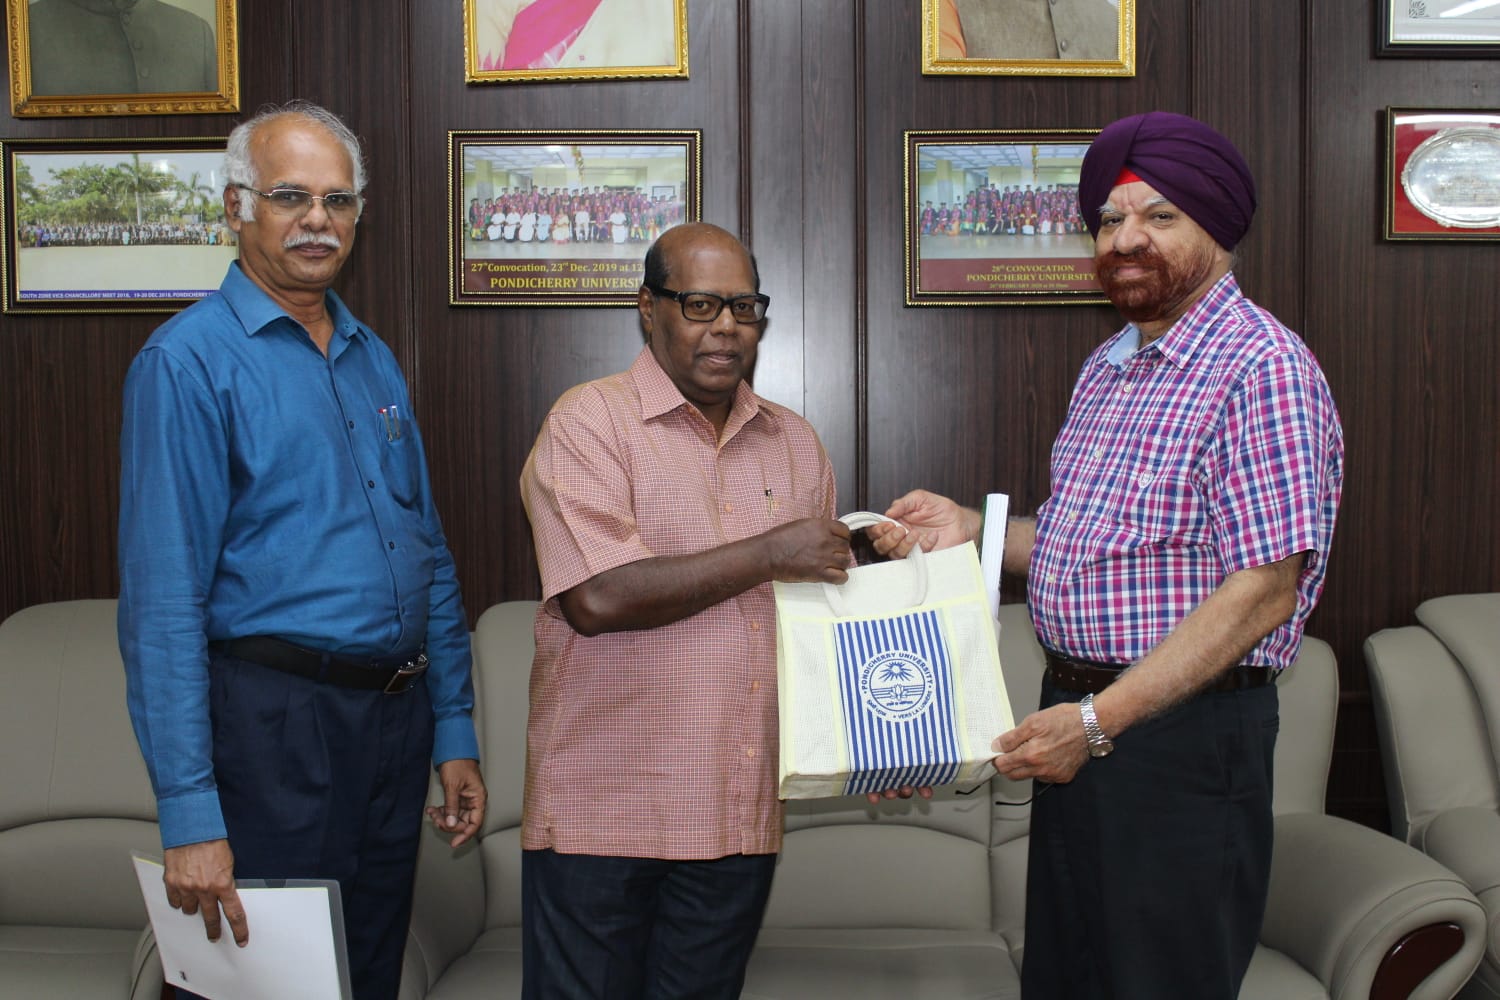 Shri Krish Ponnusamy , Former Chief Executive Officer, Govt of Mauritius visited our university and met our Vice-Chancellor Prof. Gurmeet Singh on 23.1.2023.